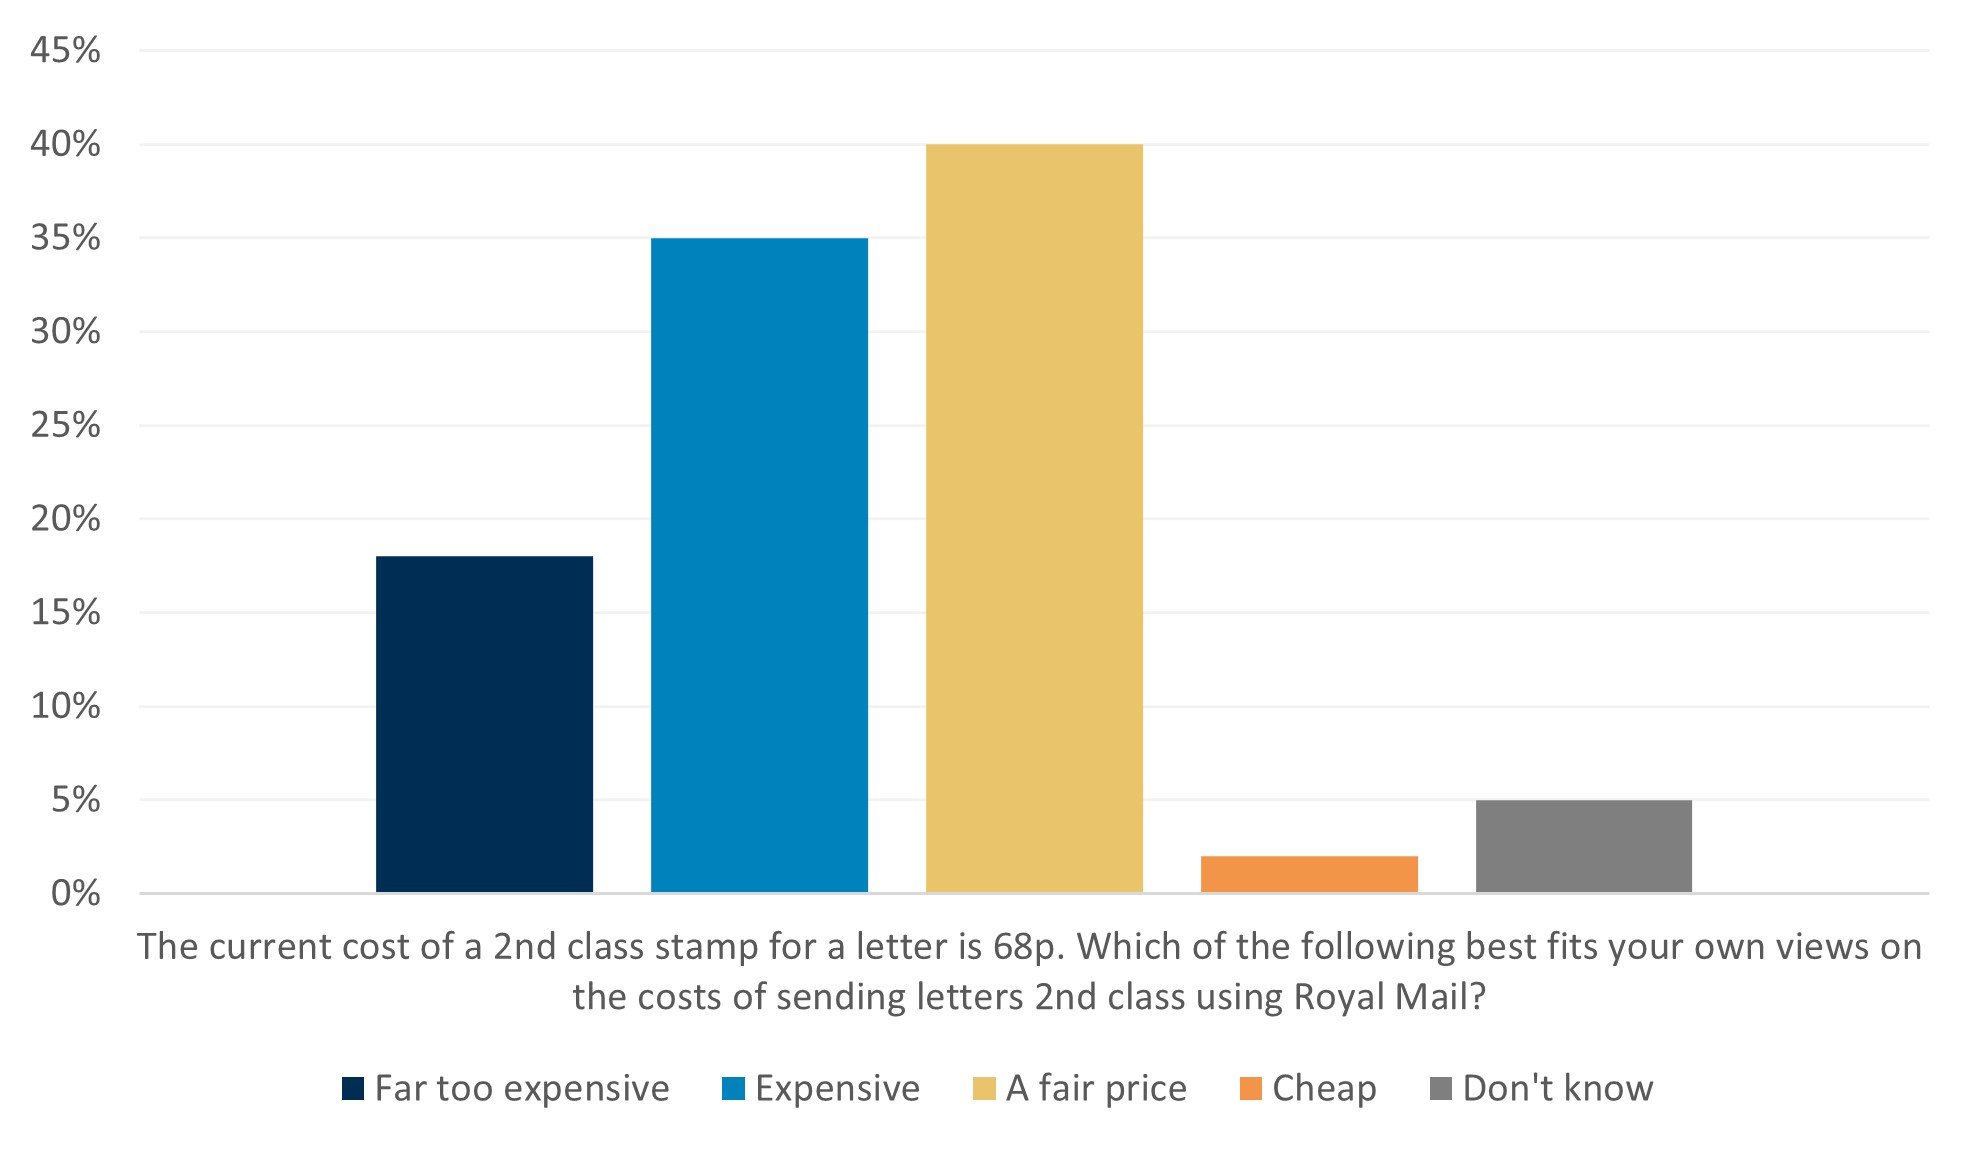 In answer to our survey question "The current cost of a 2nd class stamp for a letter is 68p. Which of the following best fits your own views on the costs of sending letters 2nd class using Royal Mail? 18% said it was far too expensive, 35% said it was expensive, 35% said it was a fair price, 2% said it was cheap, 5% said they don't know.